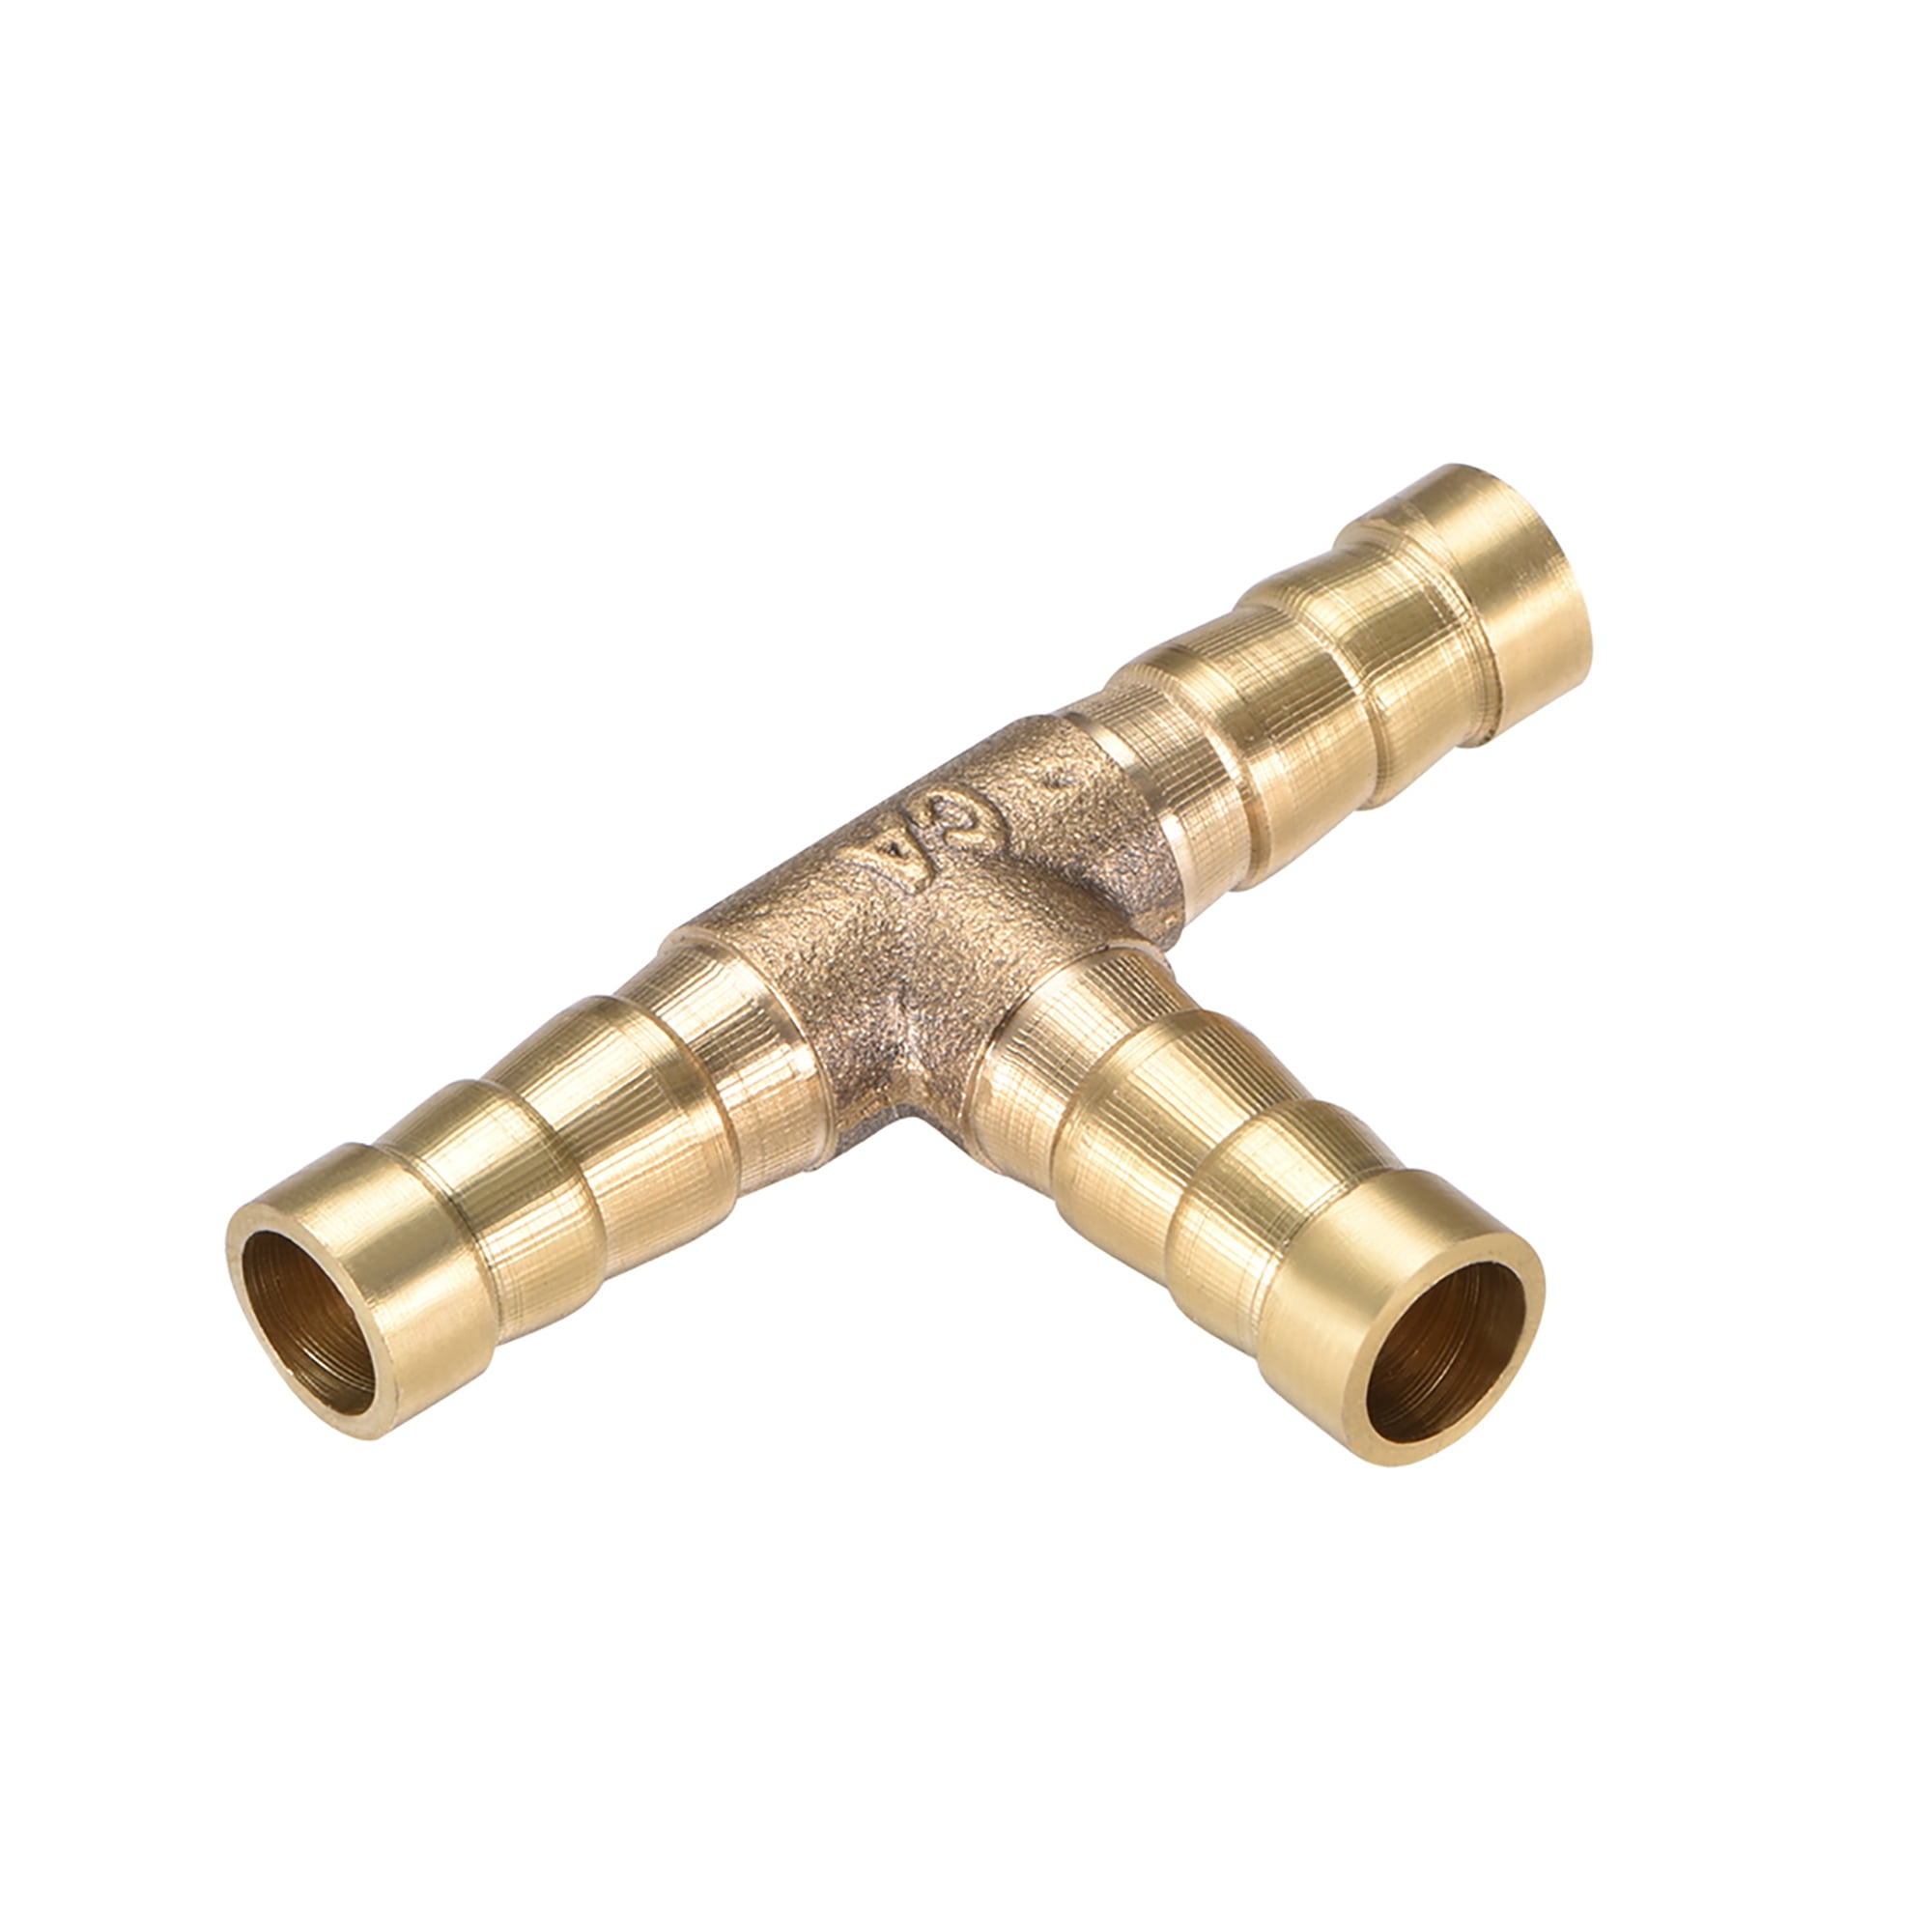 <HBT2-08 Hose Barb Tee for 1/2" ID Hose Brass 3-Way Fitting Fuel Water 5-Pack 